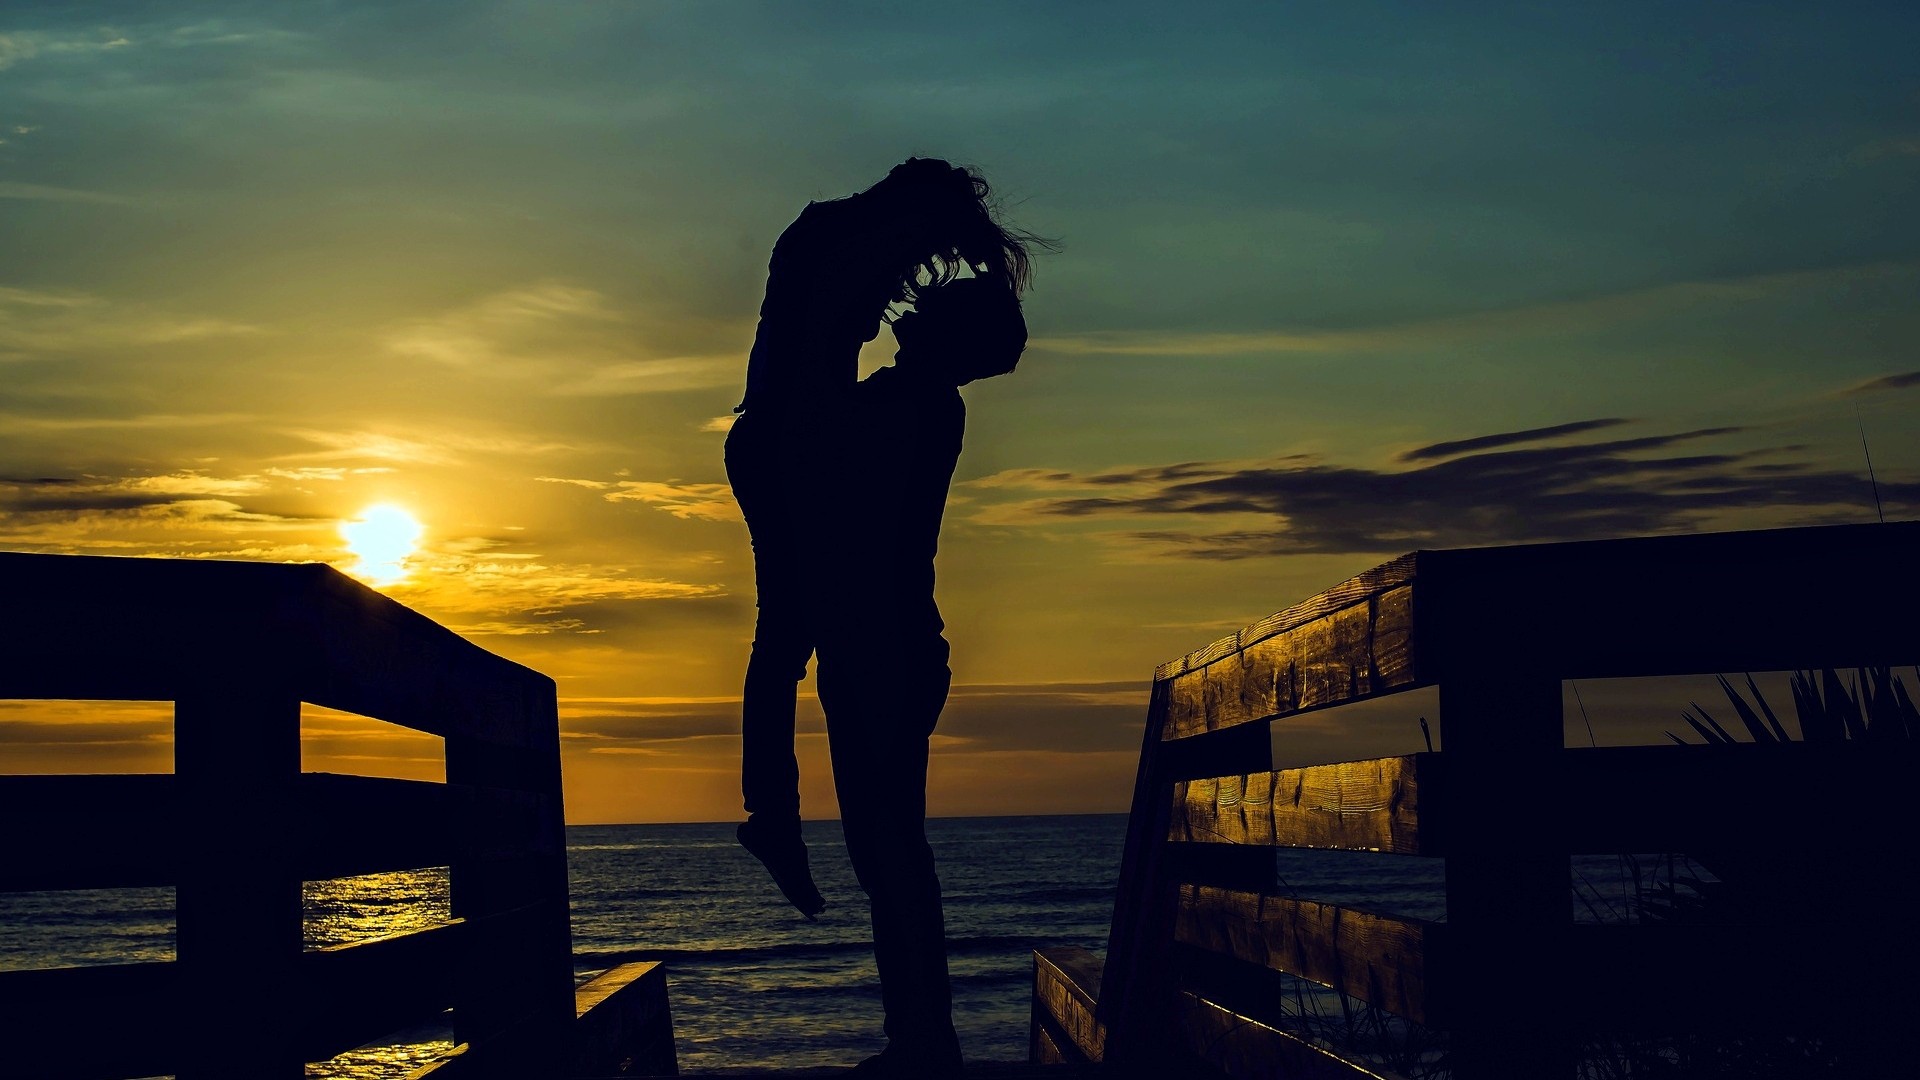 Wallpaper Download Couple In Love Near The Sea At Sunset - Romance Background , HD Wallpaper & Backgrounds